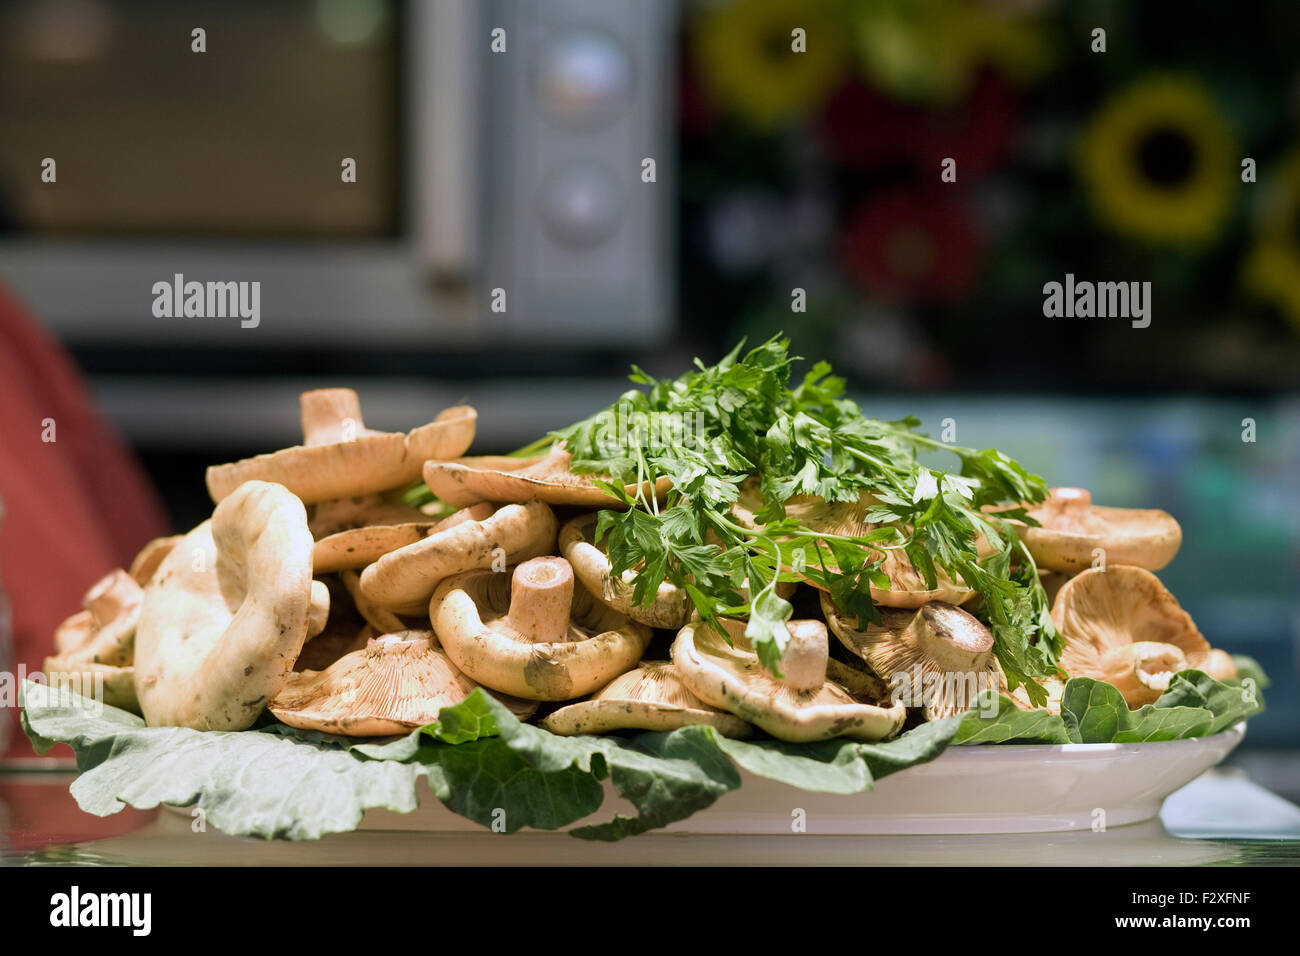 Meal of mushrooms and parsley on a plate Stock Photo